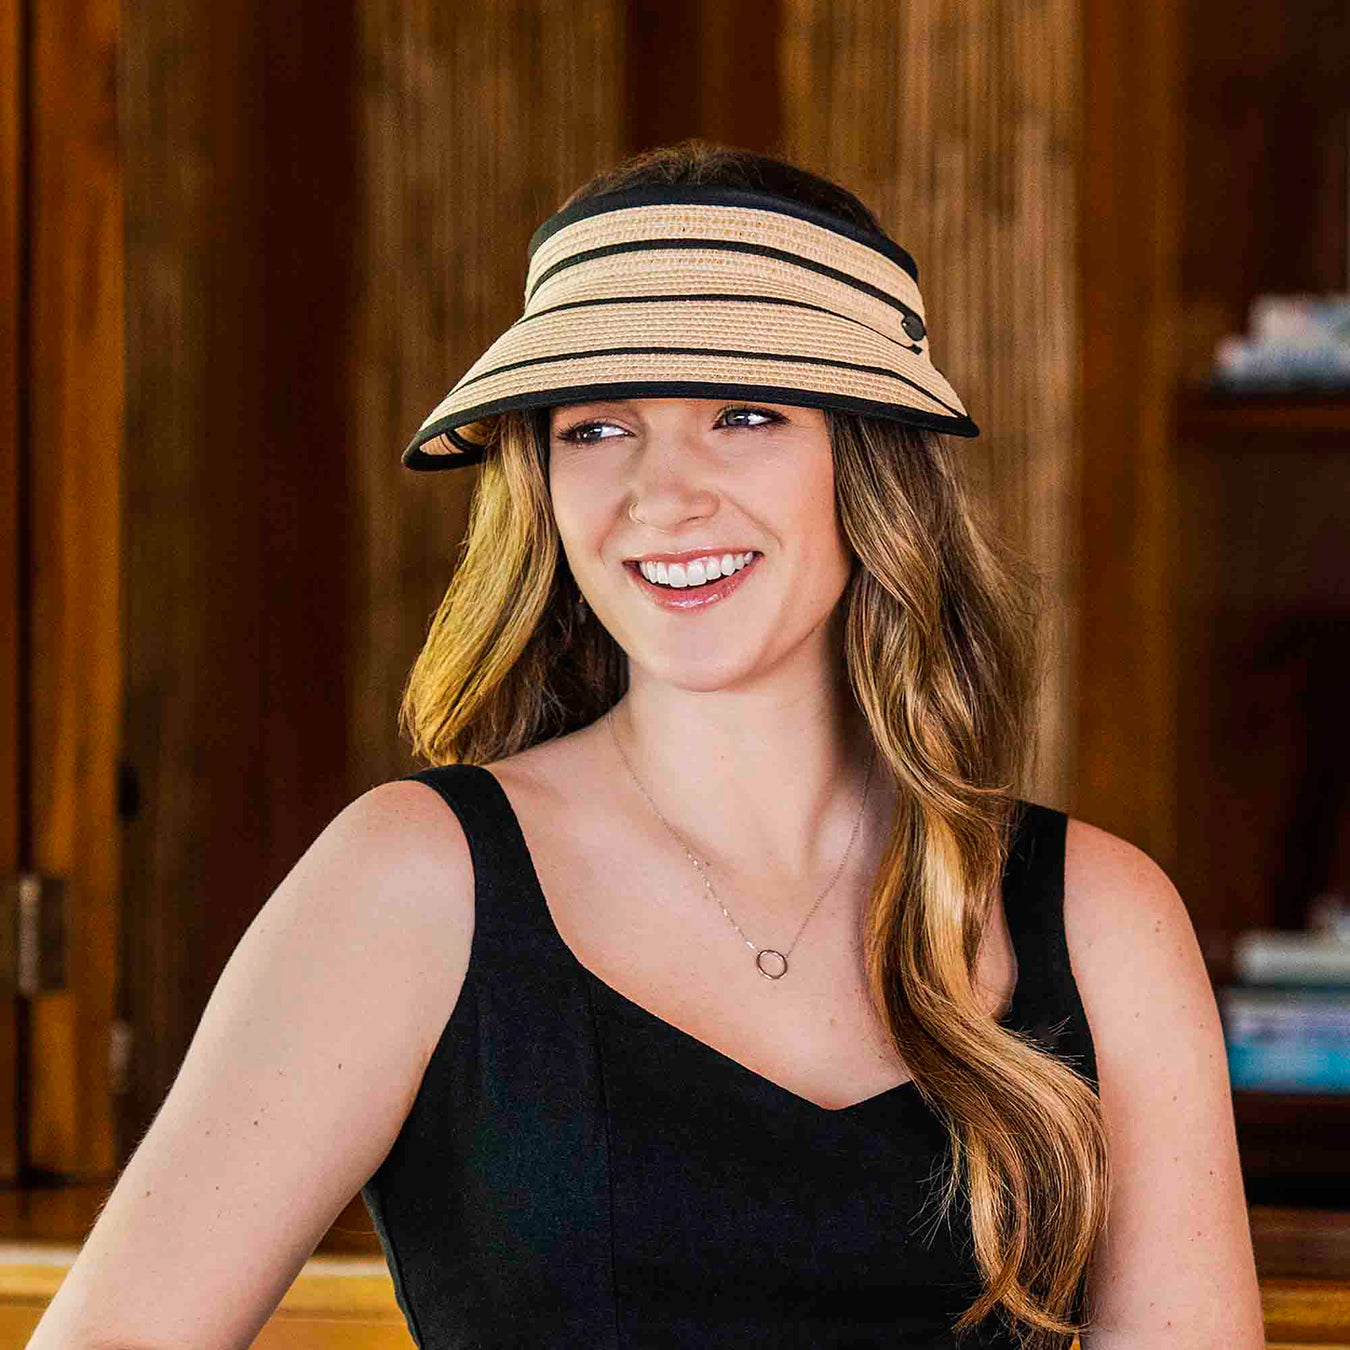 Woman wears a small size sun visor hat made for petite heads. Natural color visor with black stripes